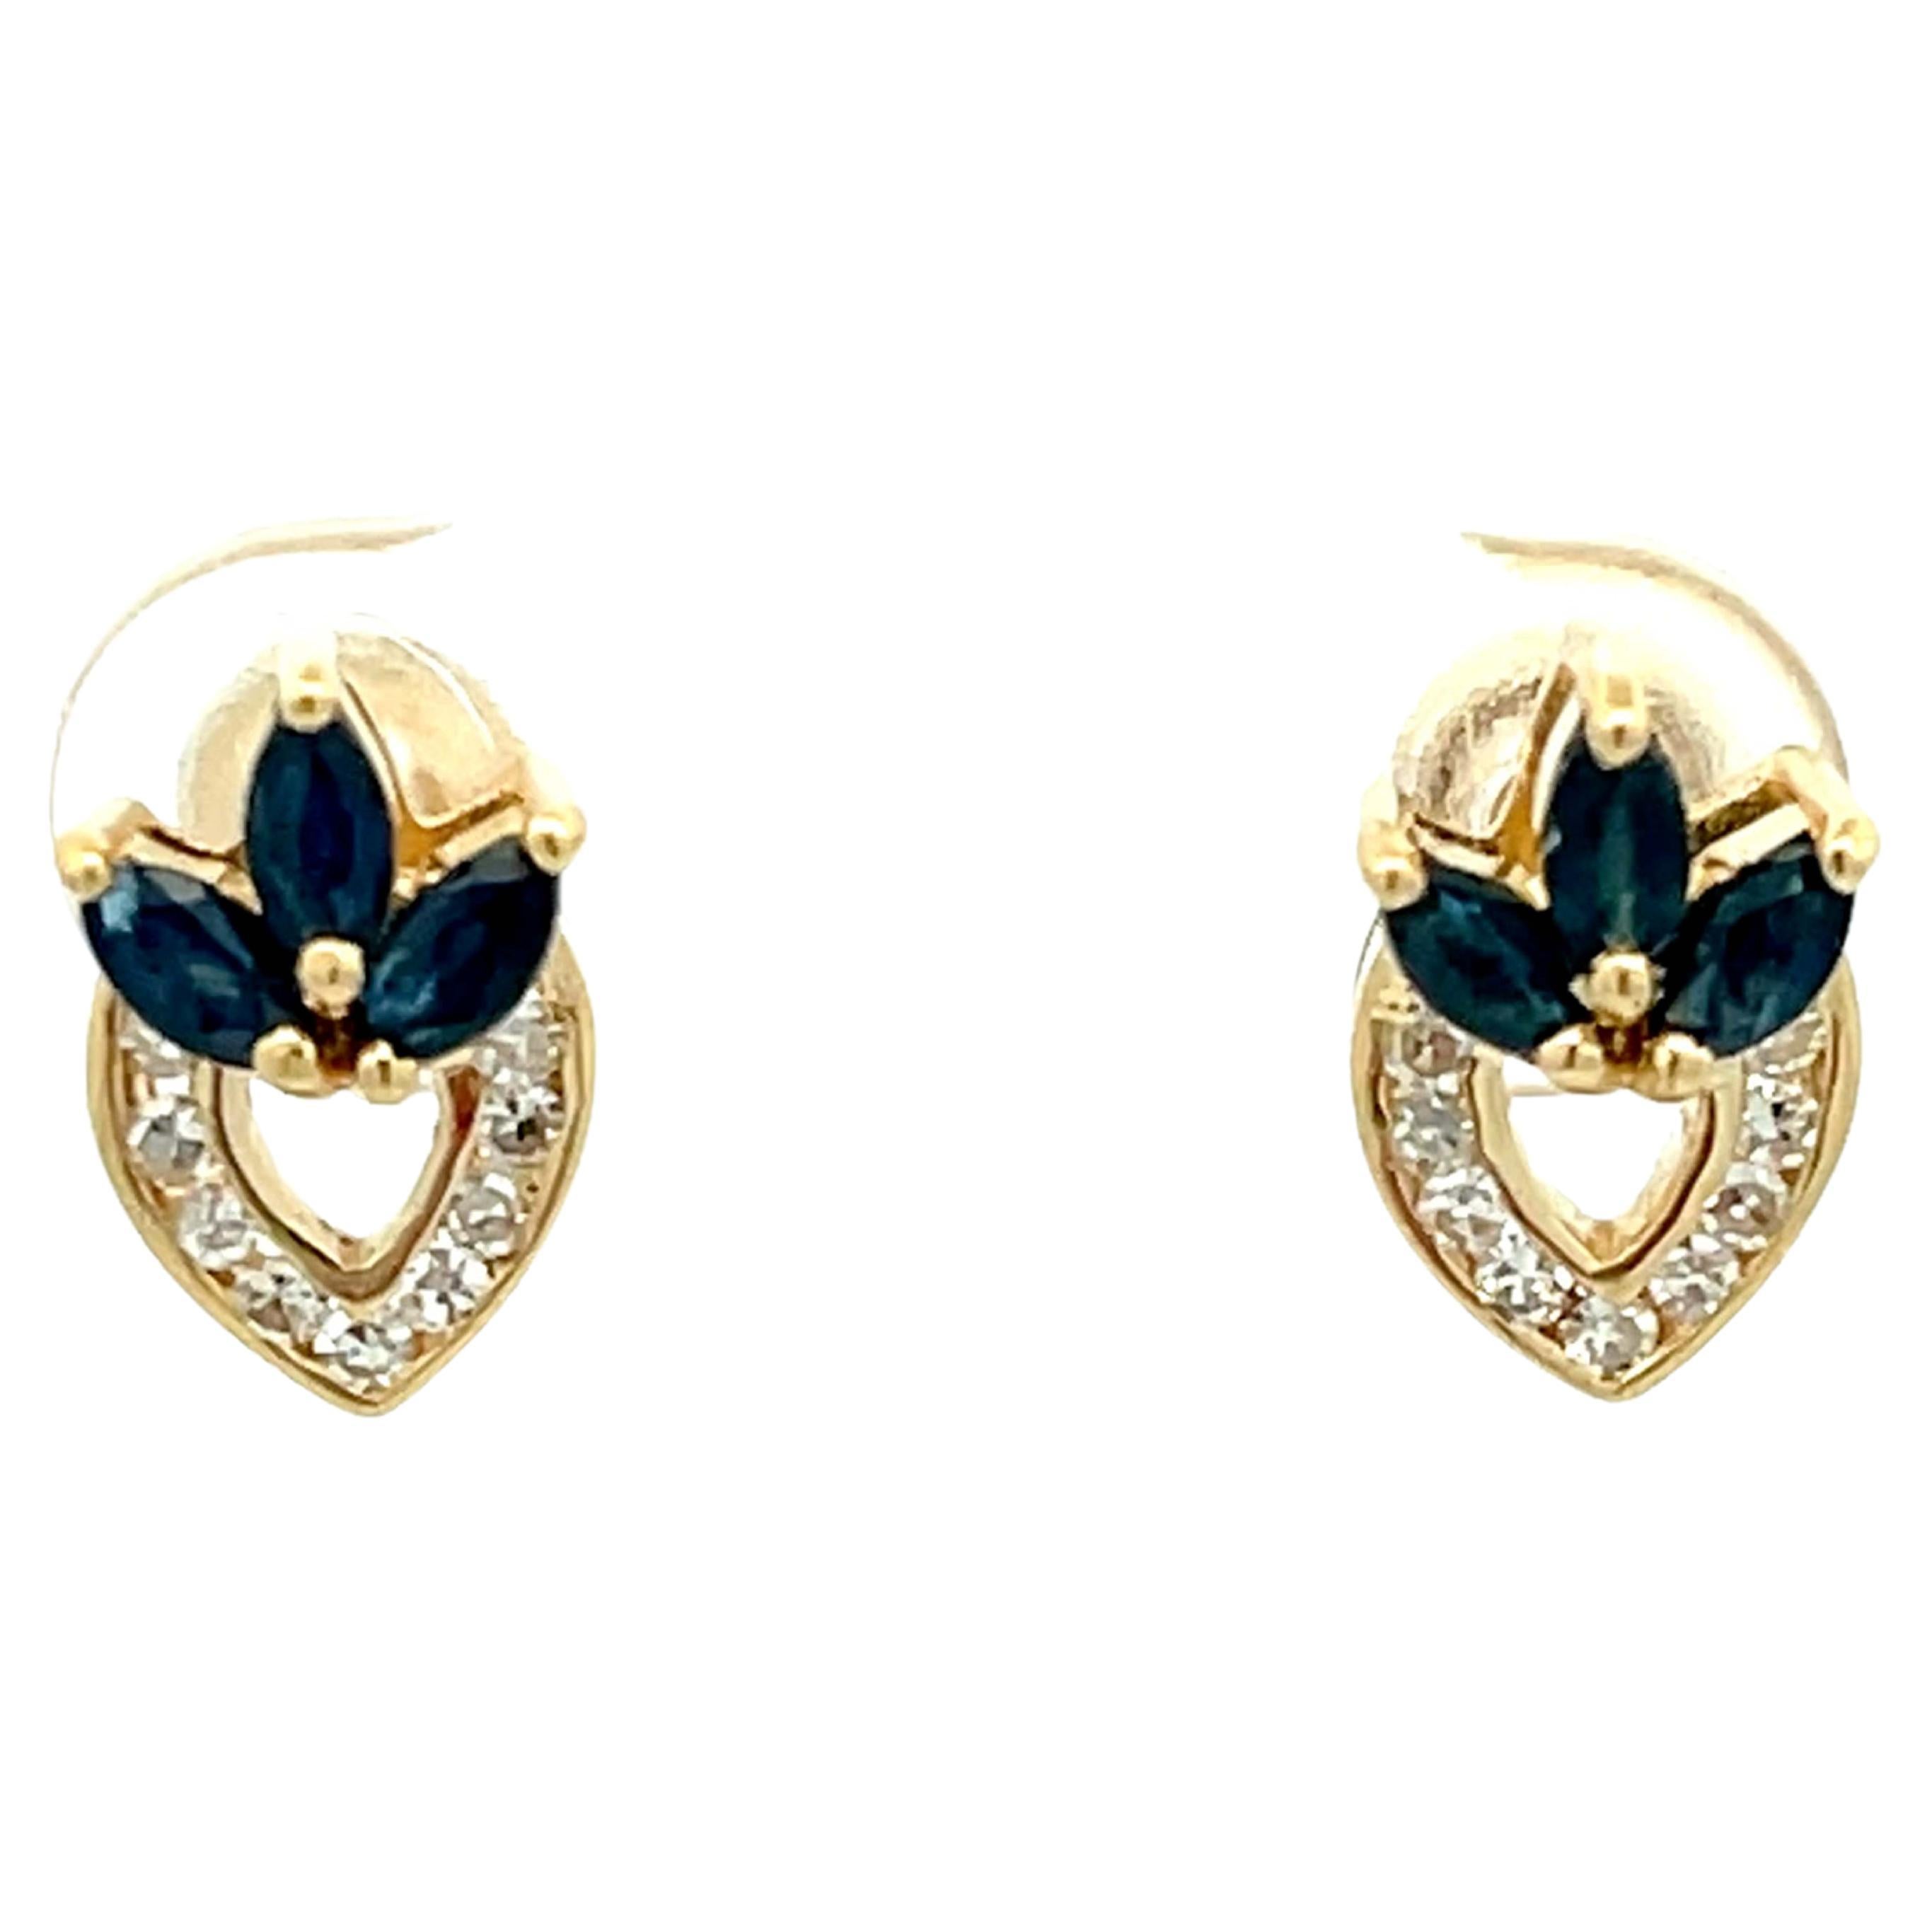 Marquise Sapphire and Diamond Earrings in 14k Yellow Gold